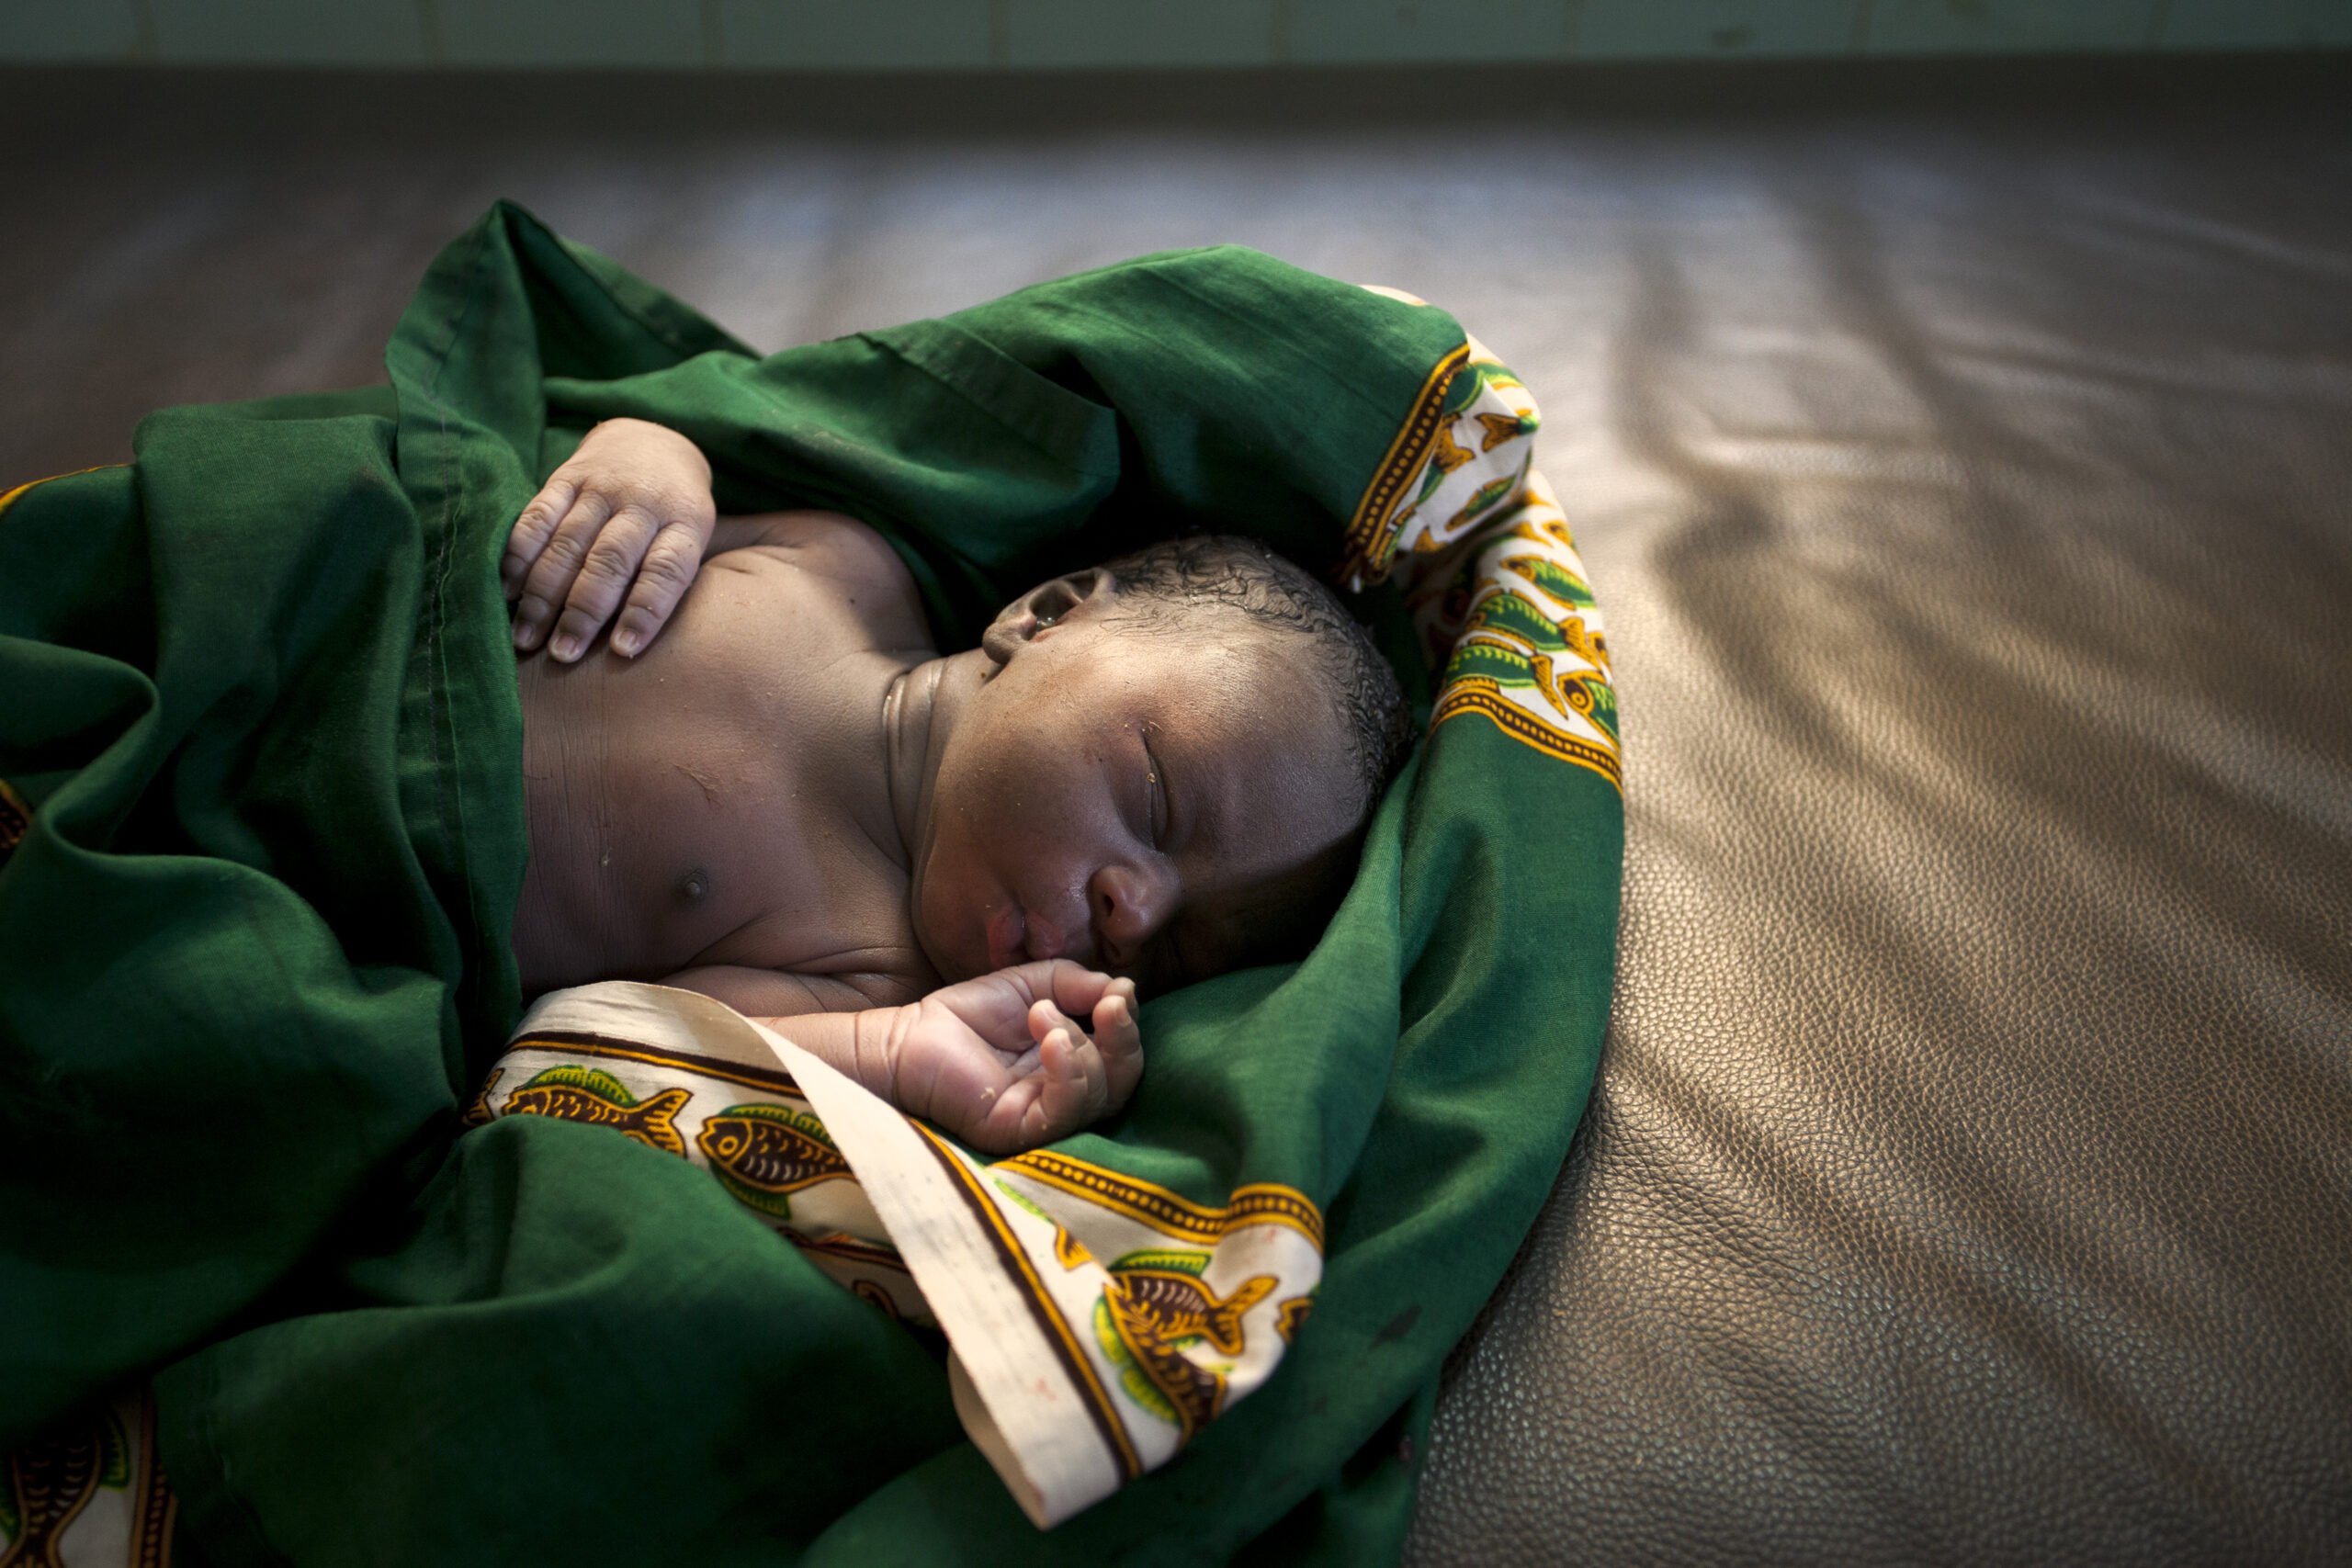 Improving Survival of Small and Sick Newborns - The Latest Findings on Kangaroo Mother Care (KMC)